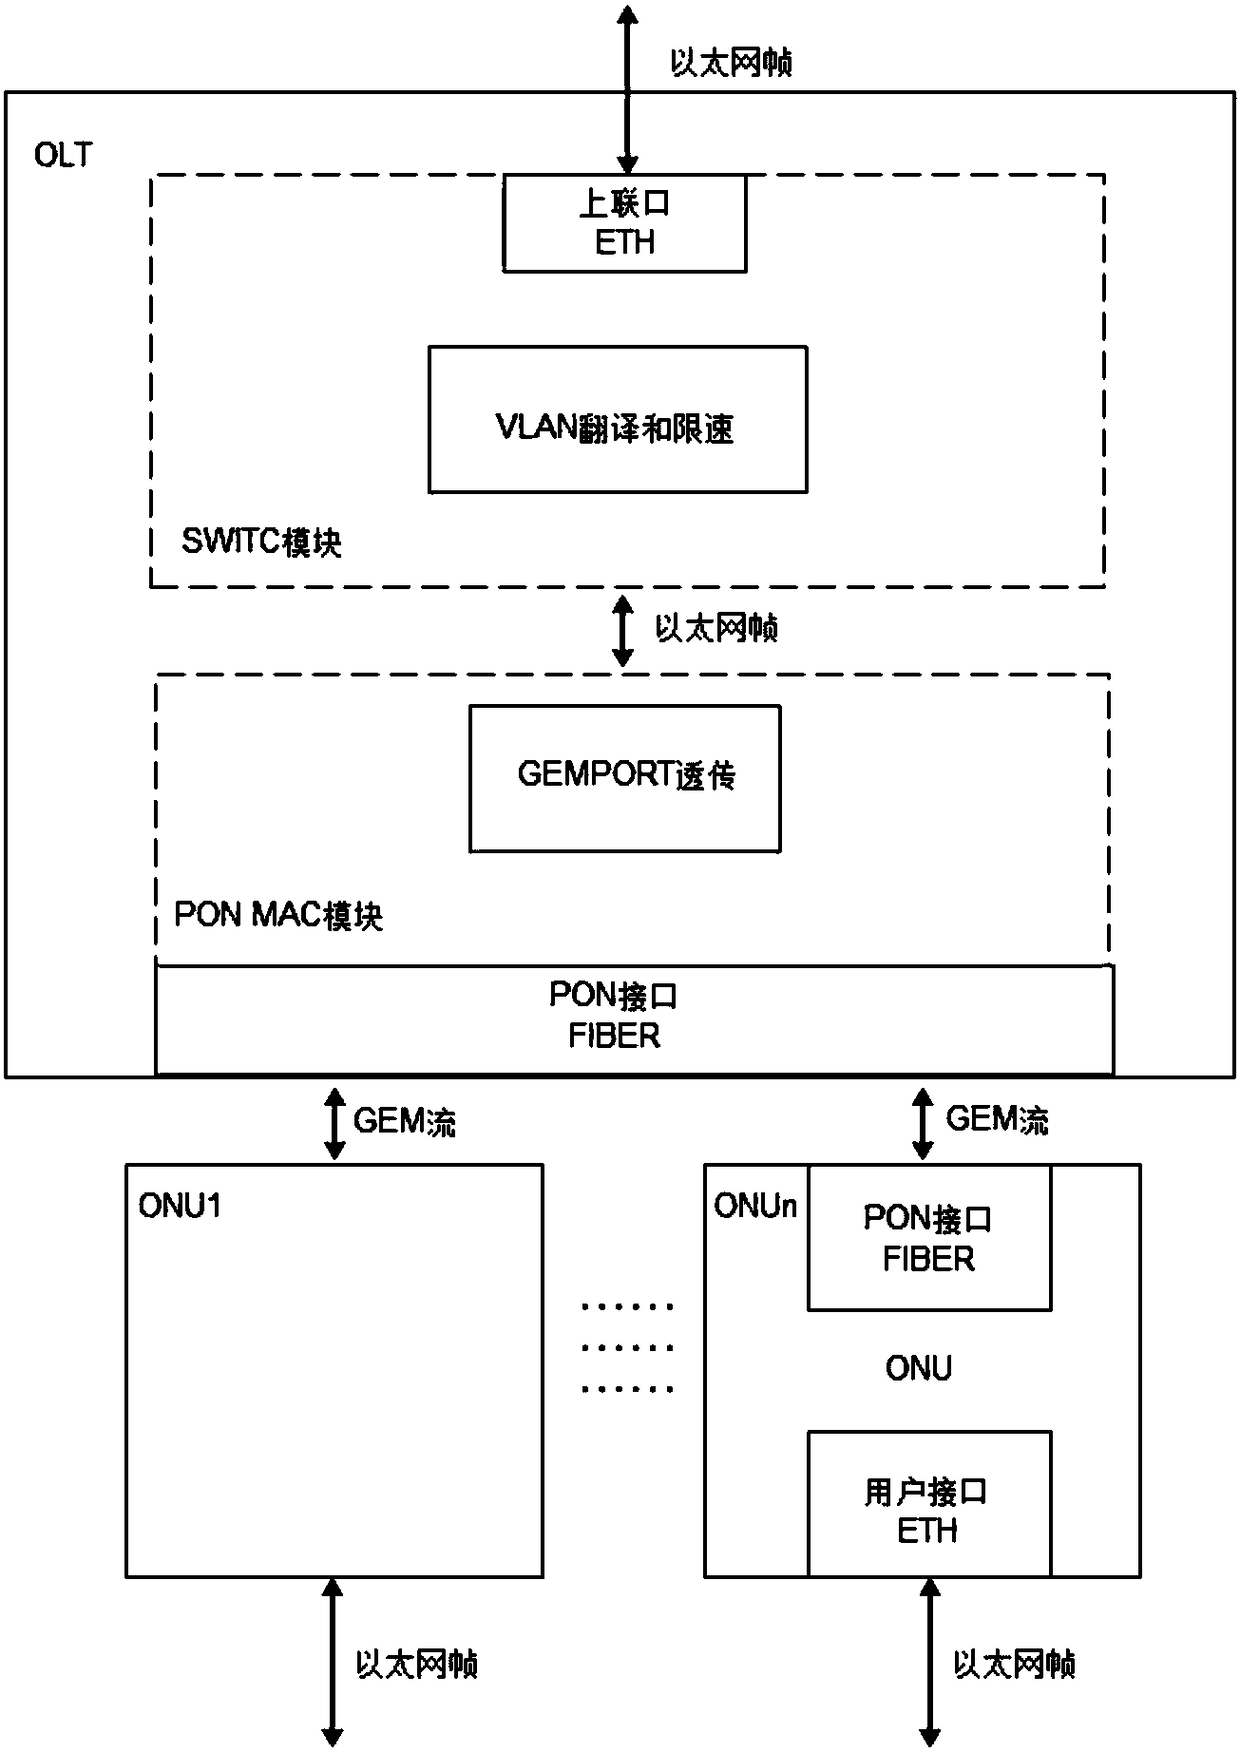 Method for achieving virtual business interface in GPON-OLT system